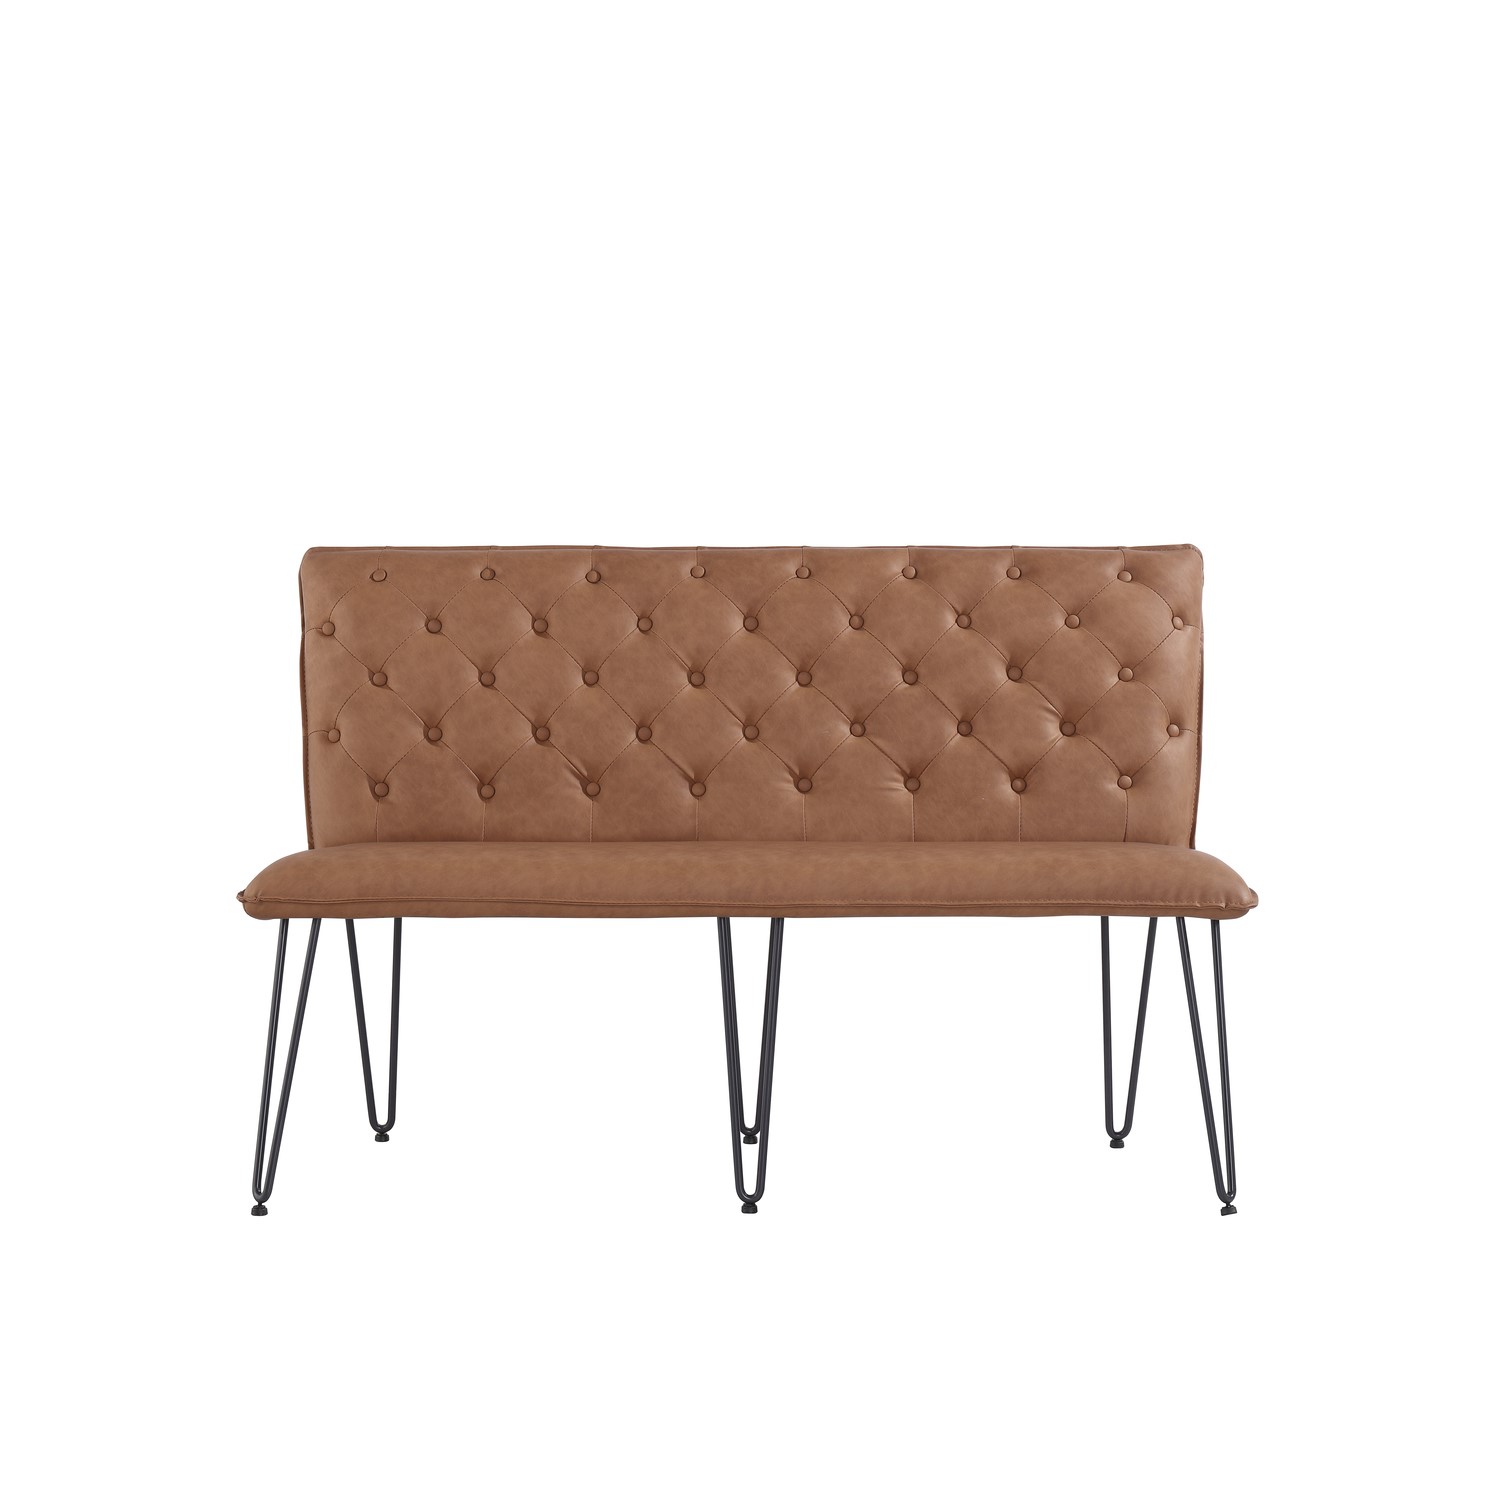 Small Tan Dining Bench With Studded, Tan Leather Bench